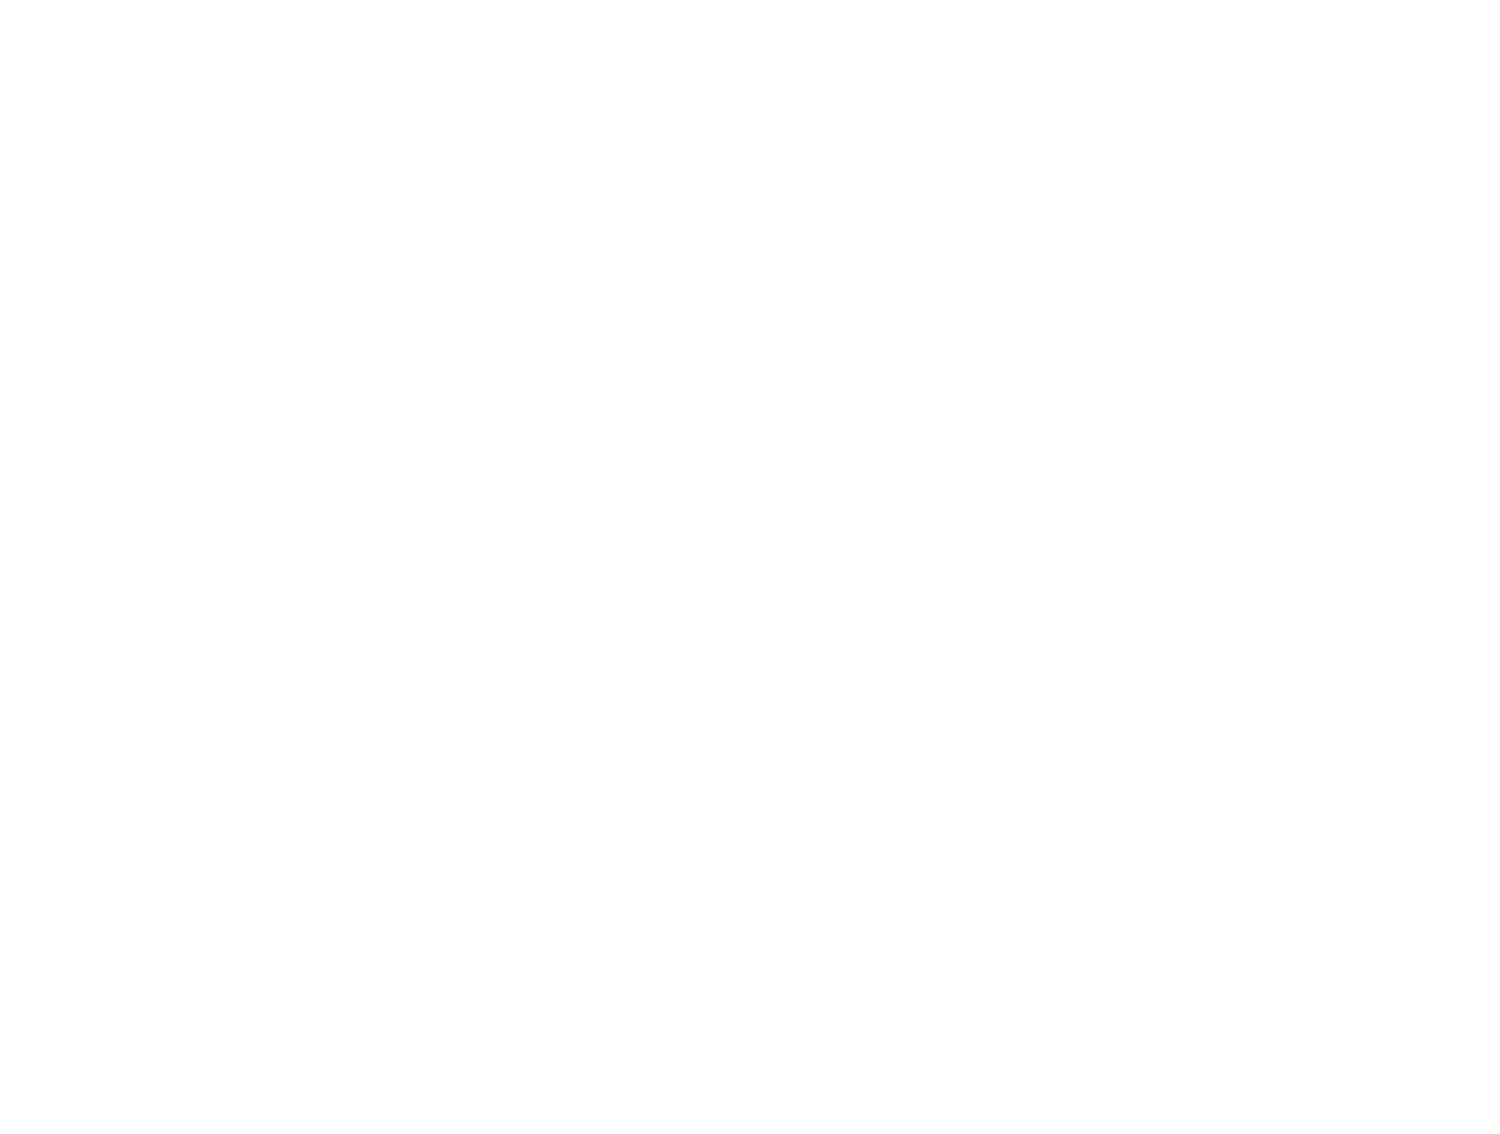 Specialist Evidence Evaluation & Research